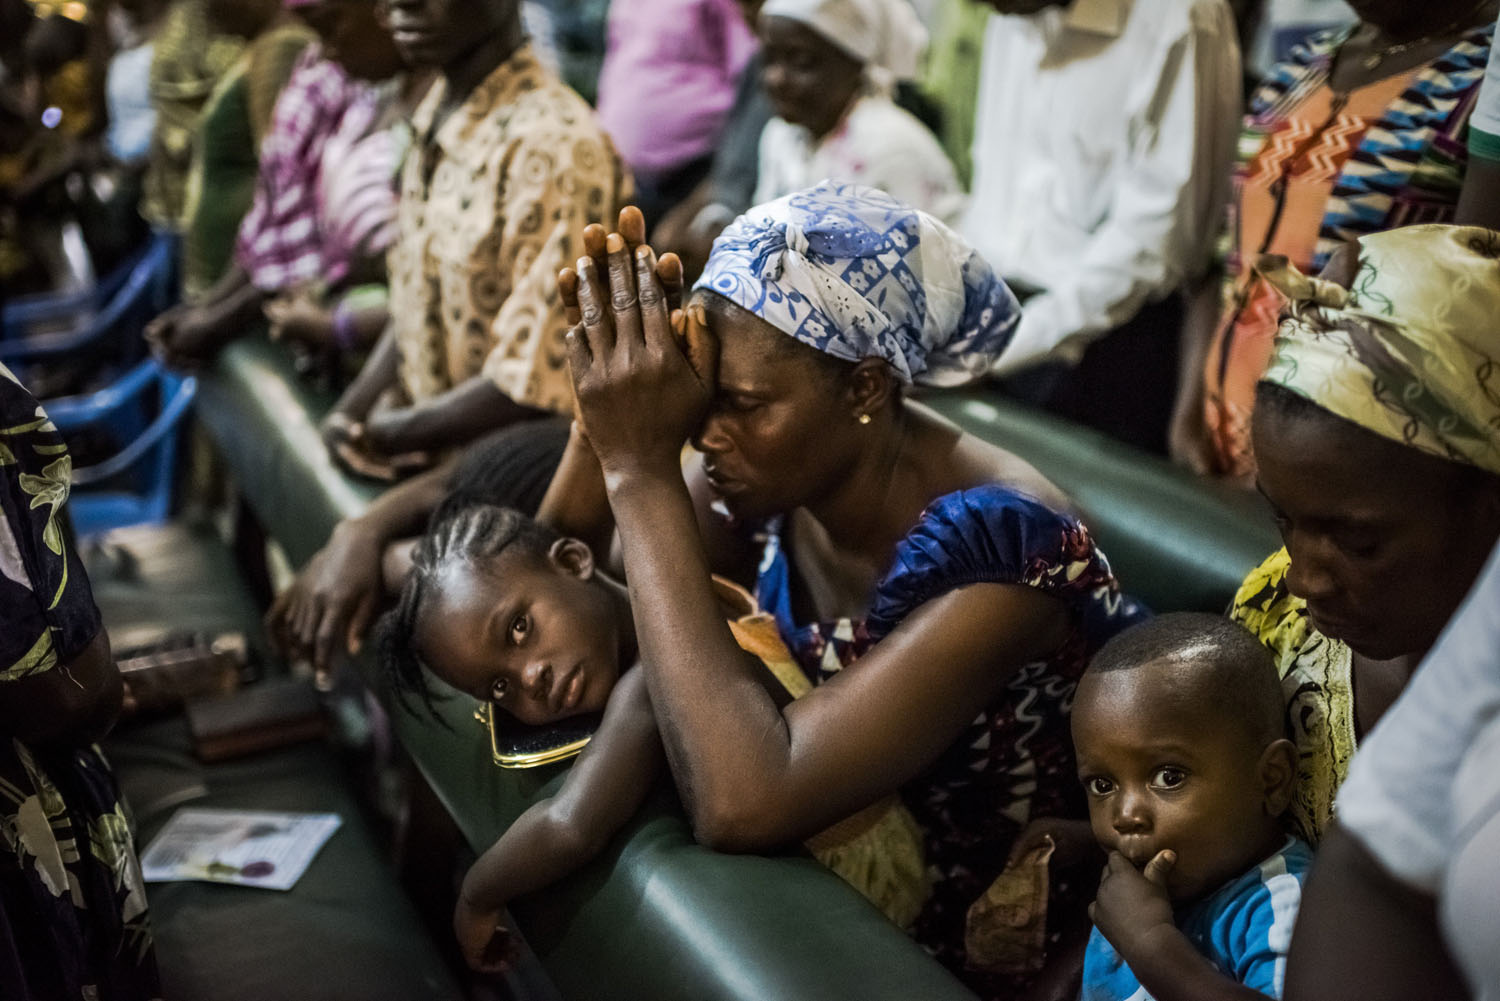 Residents of the West Point neighborhood attend church after a 10-day quarantine was lifted in Monrovia, Liberia, Aug. 31, 2014.